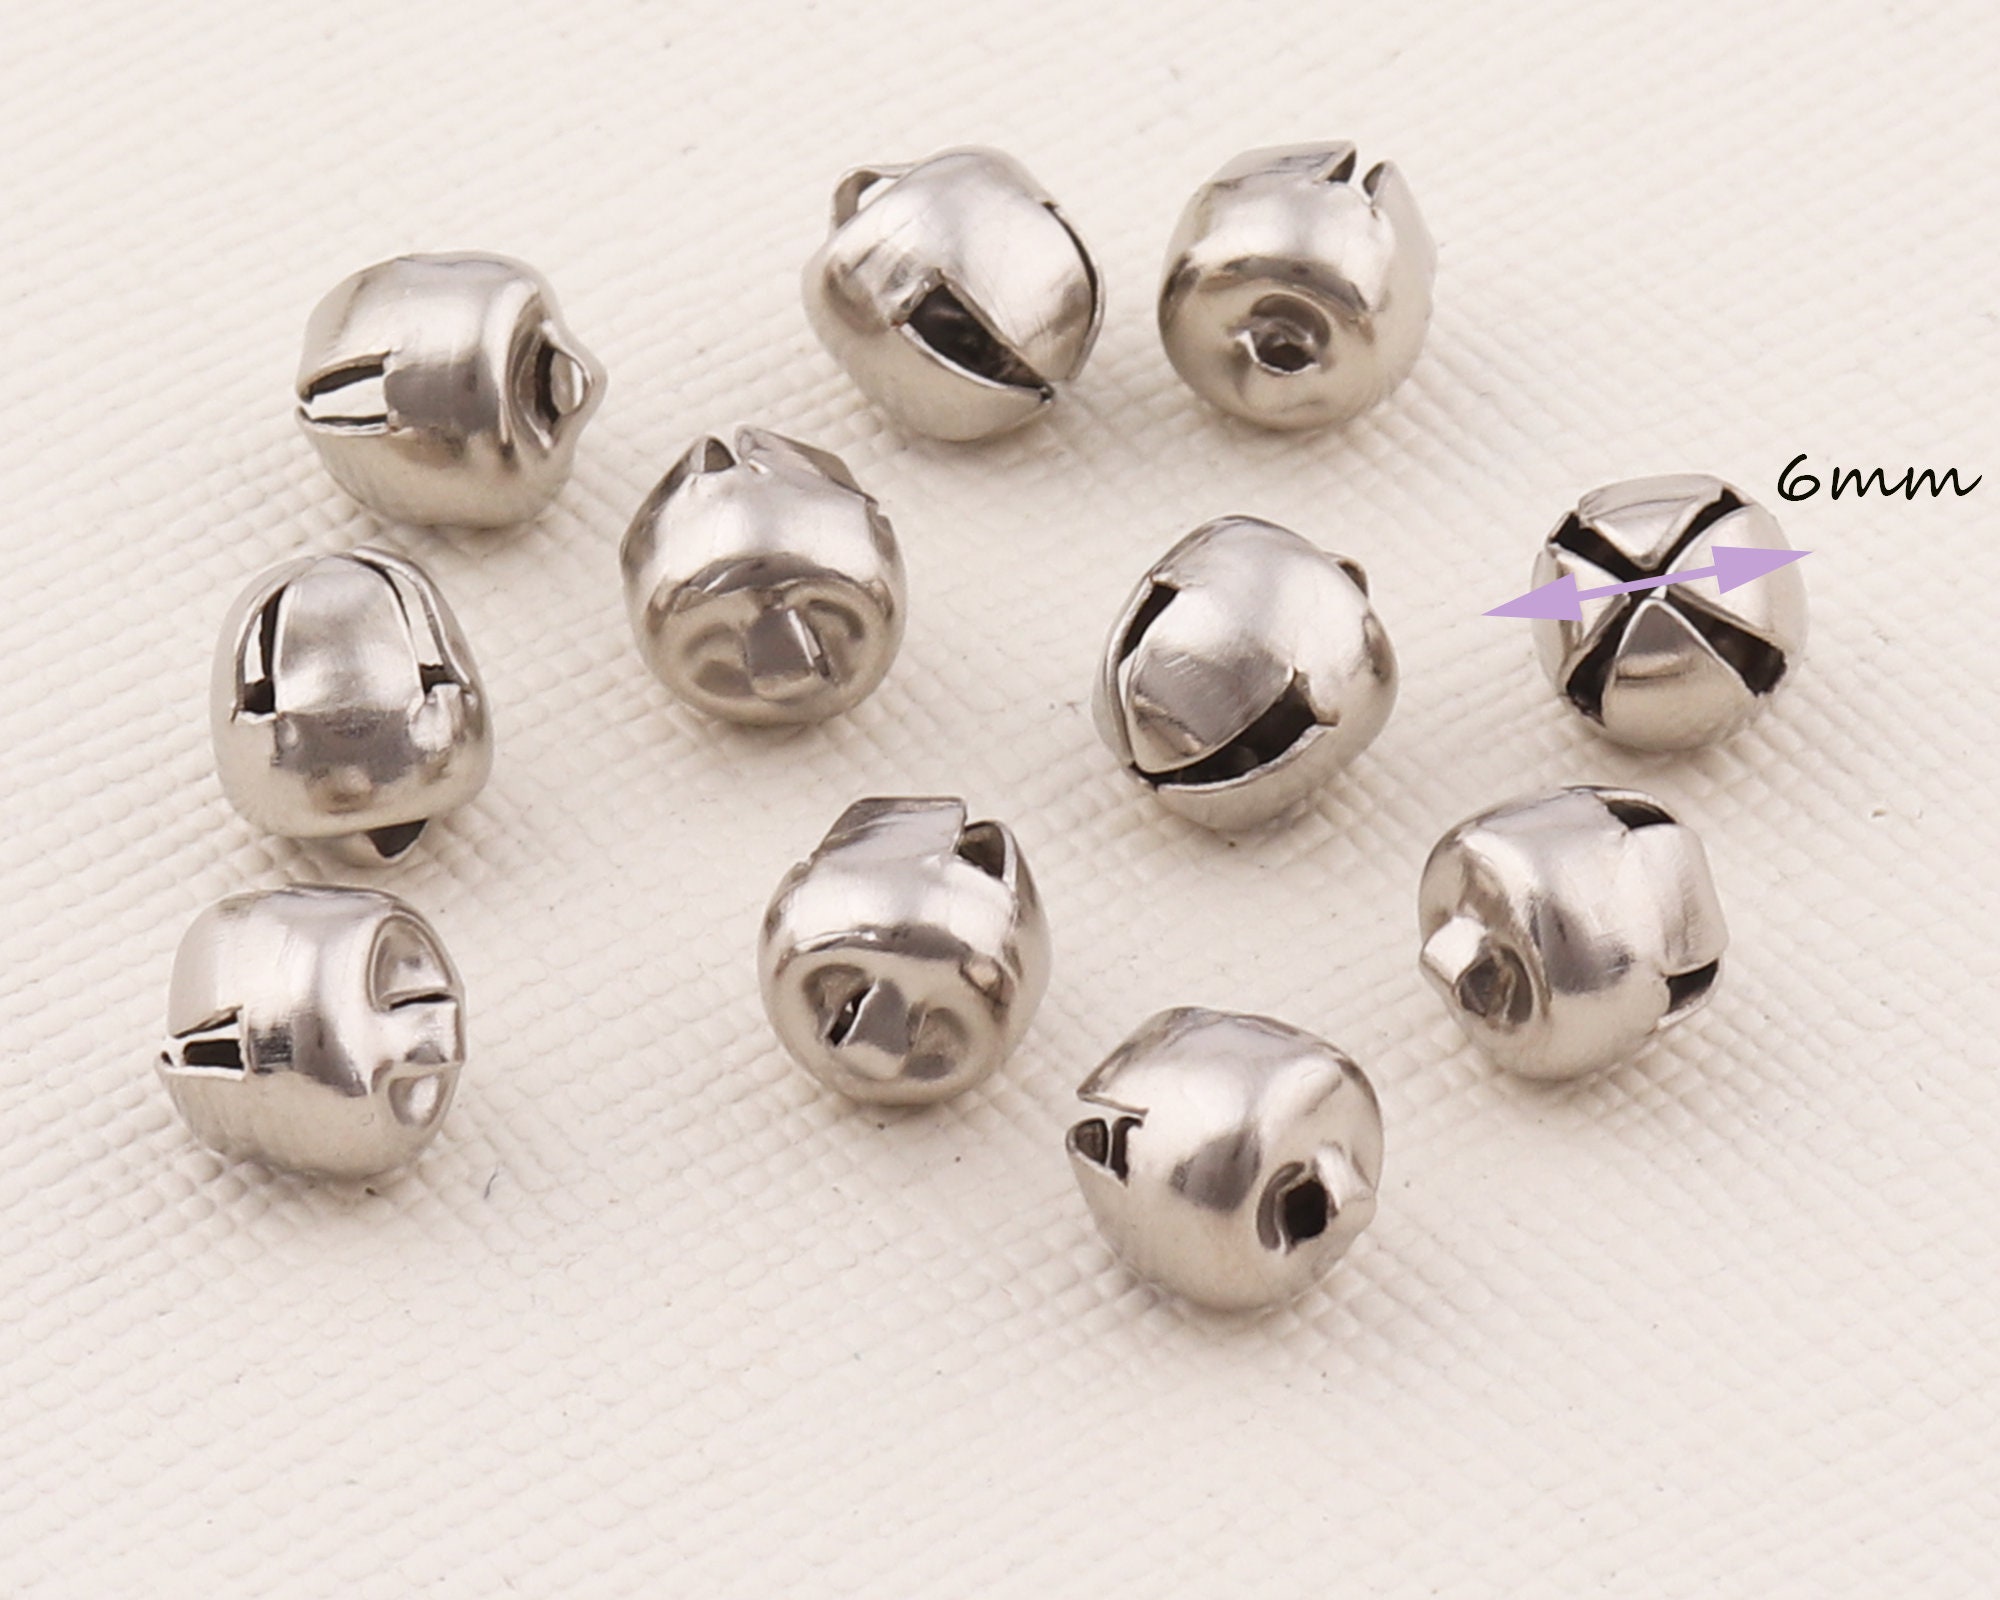 Small Bells, Mini Bells,bell Beads, Bells for Christmas, DIY Jewelry  Findings,jingle Bells,bells for the Holidays6mm300pcs 